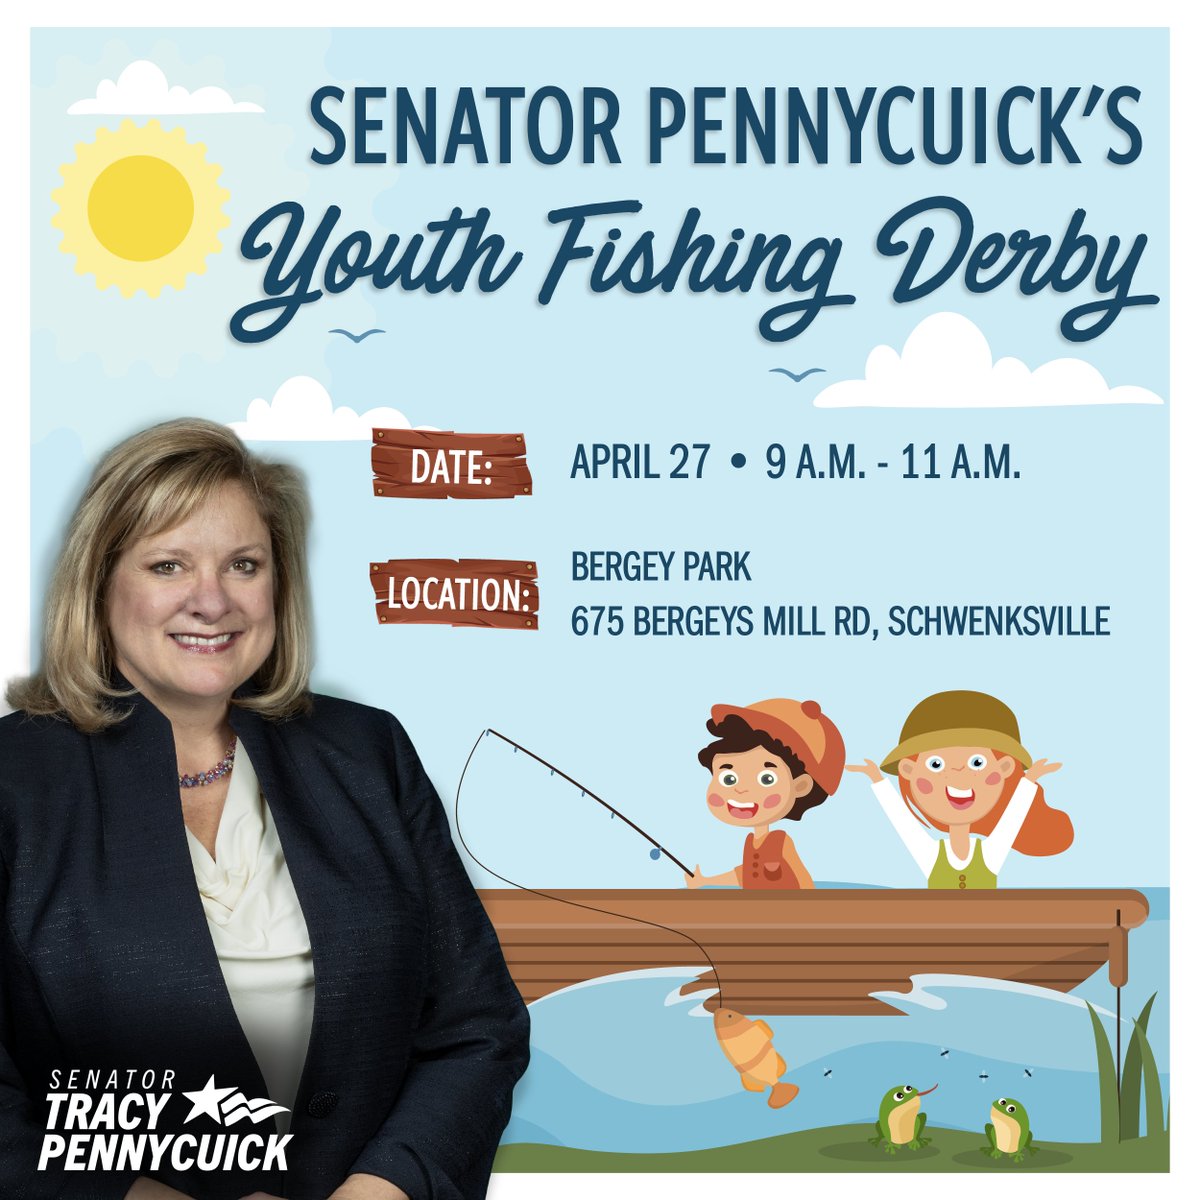 Grab your fishing poles and join us for a fun filled day outdoors while learning about our diverse wildlife and the importance of preserving our natural environment! 🎣

Sign up here ➡senatorpennycuick.com/youth-fishing-…

✨We look forward to seeing you there!✨

#FishingDerby #BergeyPark